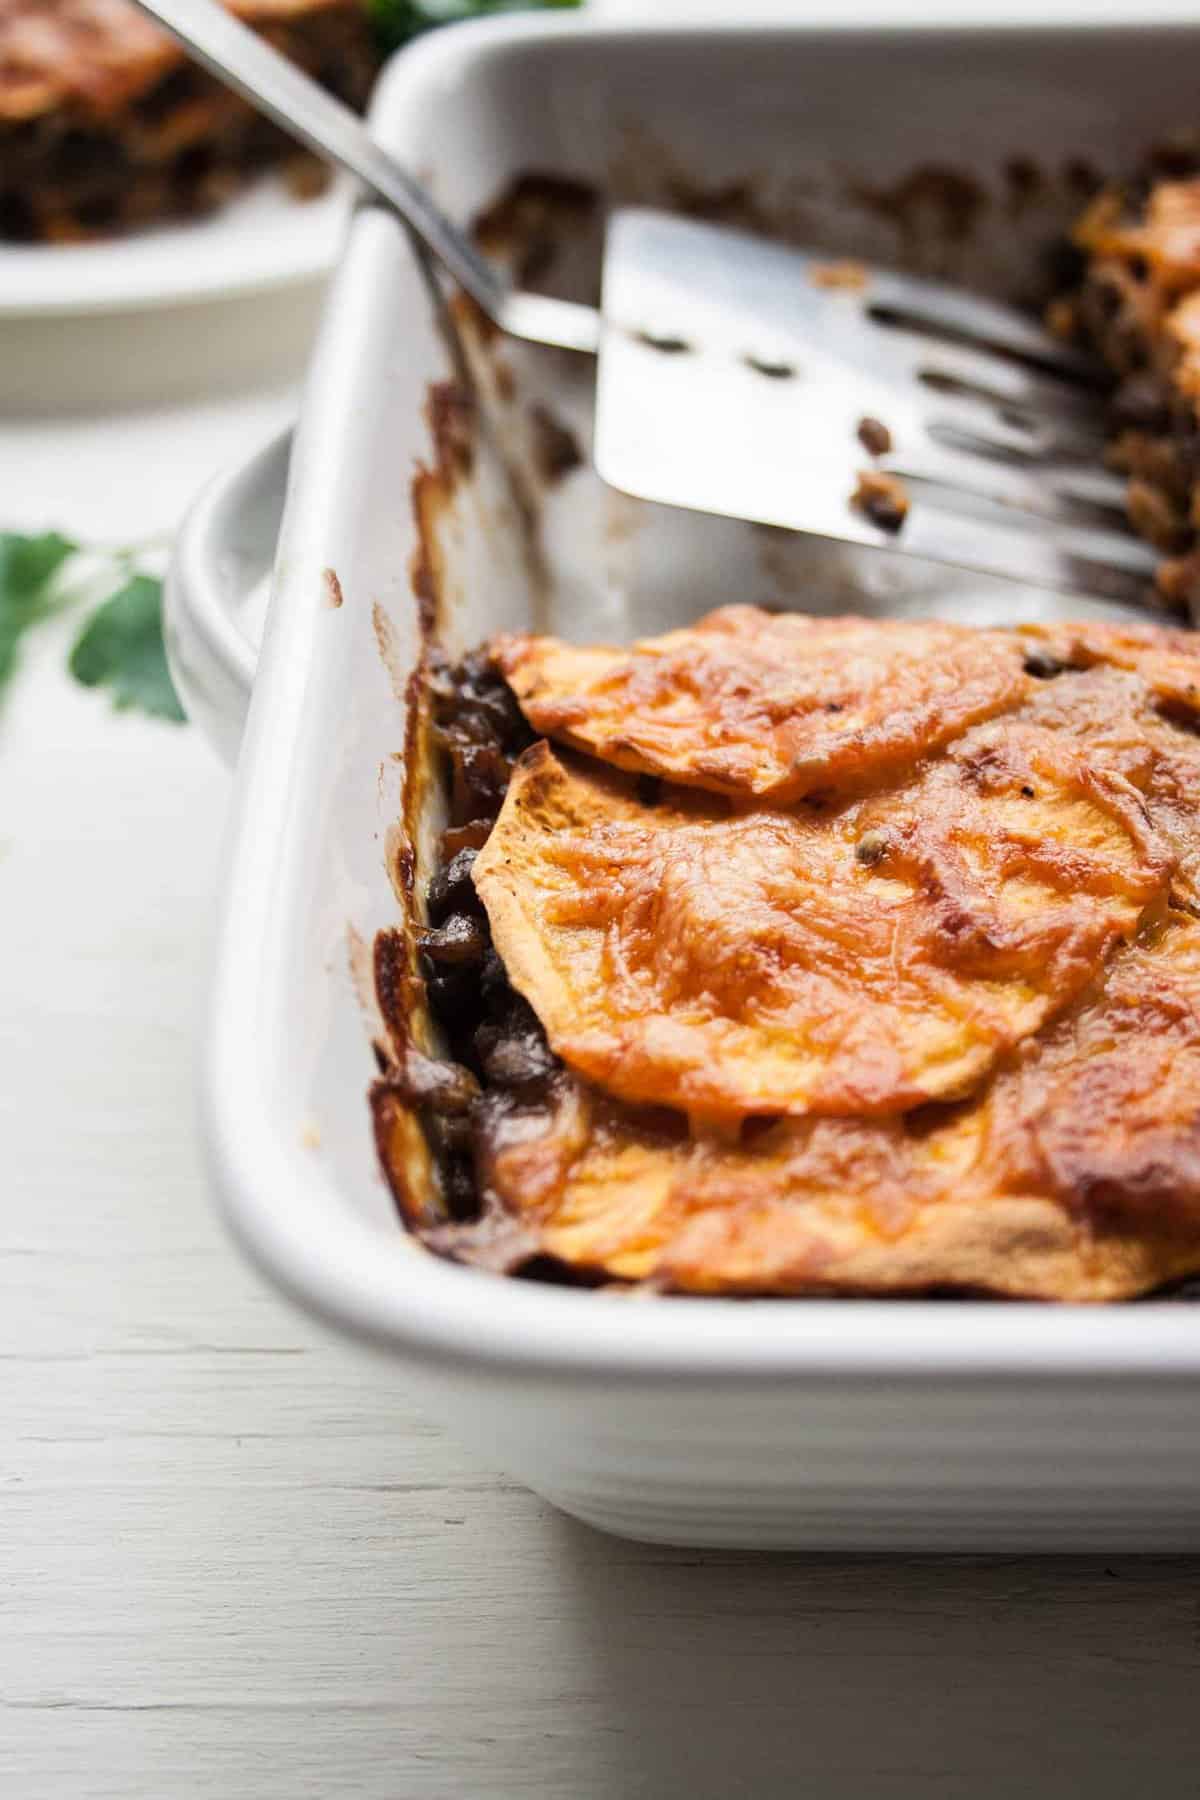 Lentil and Sweet Potato Lasagne - a super savoury vegetarian recipe that just happens to be healthy too! | eatloveeats.com